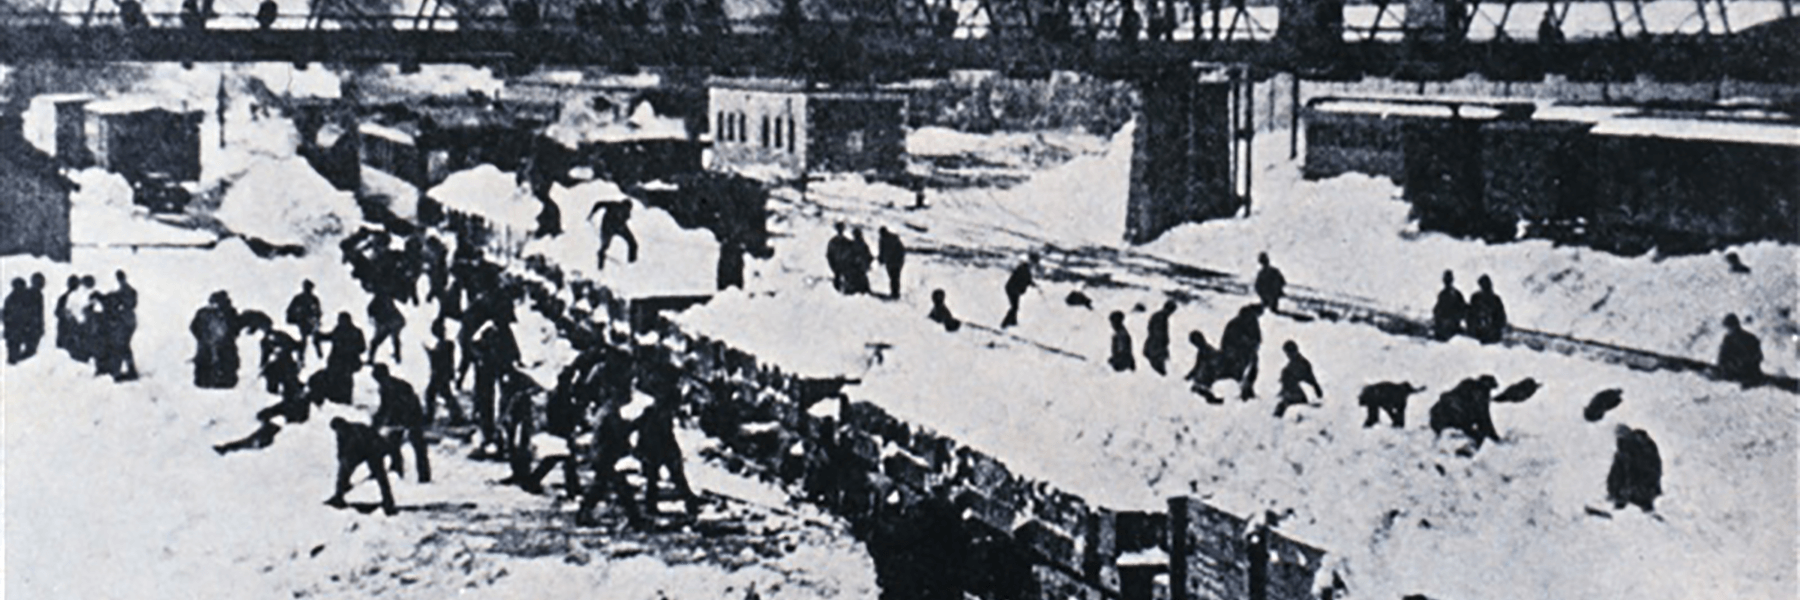 The Great Blizzard of 1888: Men in New York City shovel snow into train cars to be taken out of the city. An “Army of the Shovel” was formed to clear the city of snow. Credit: NOAA.